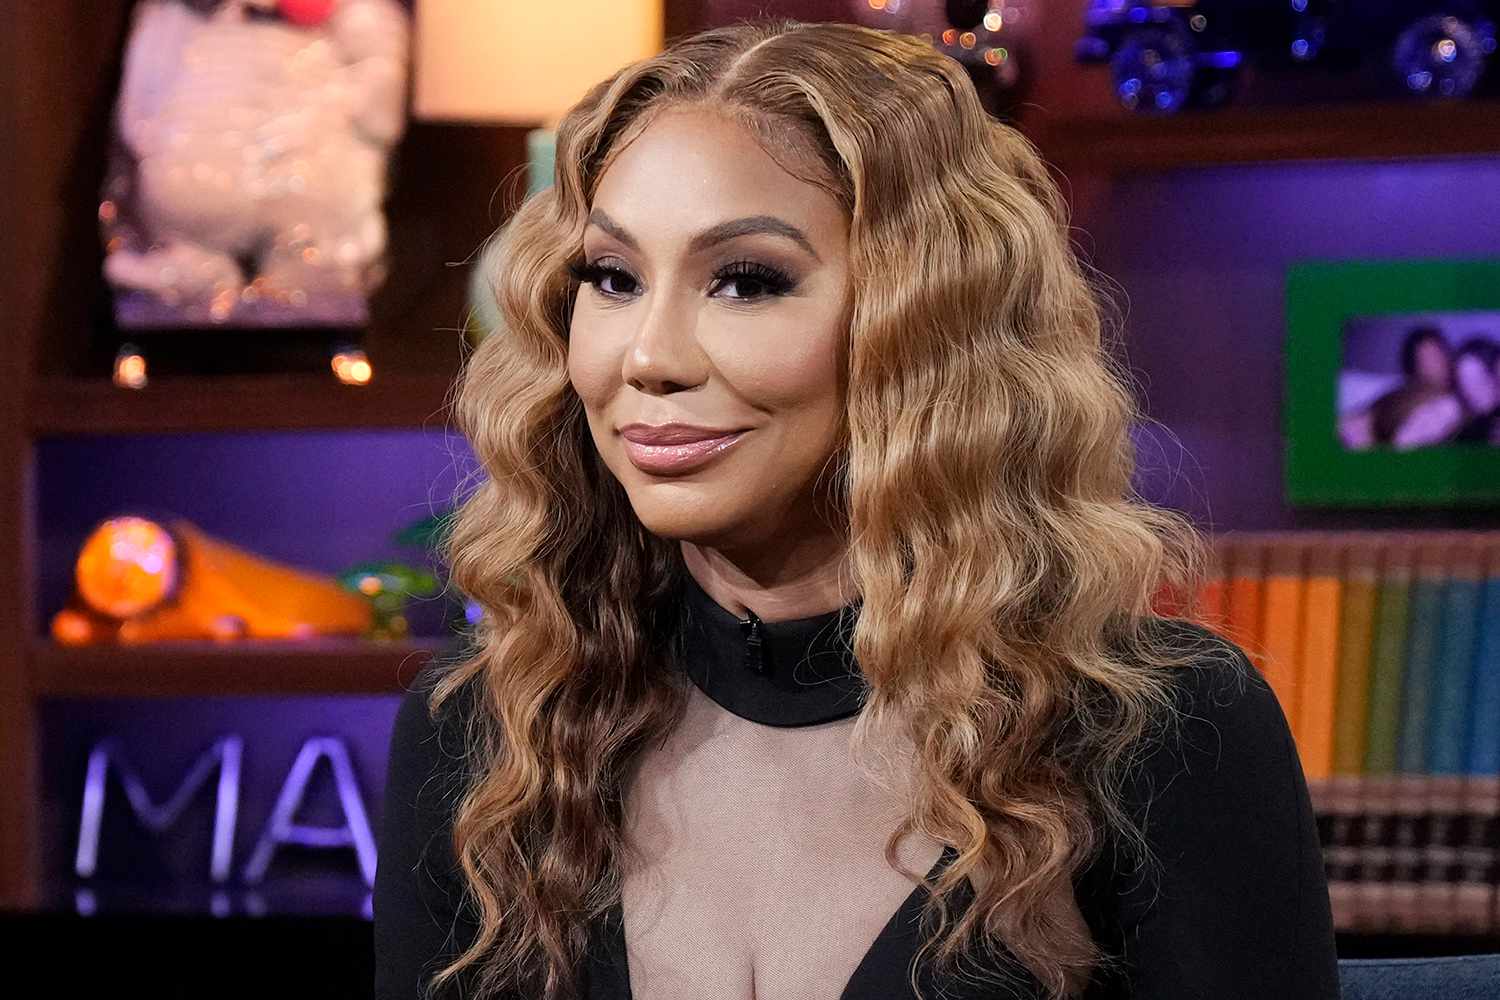 Tamar Braxton Reveals Why She Turned Down “The Real Housewives of Atlanta”: ‘All Money Ain’t Good Money’